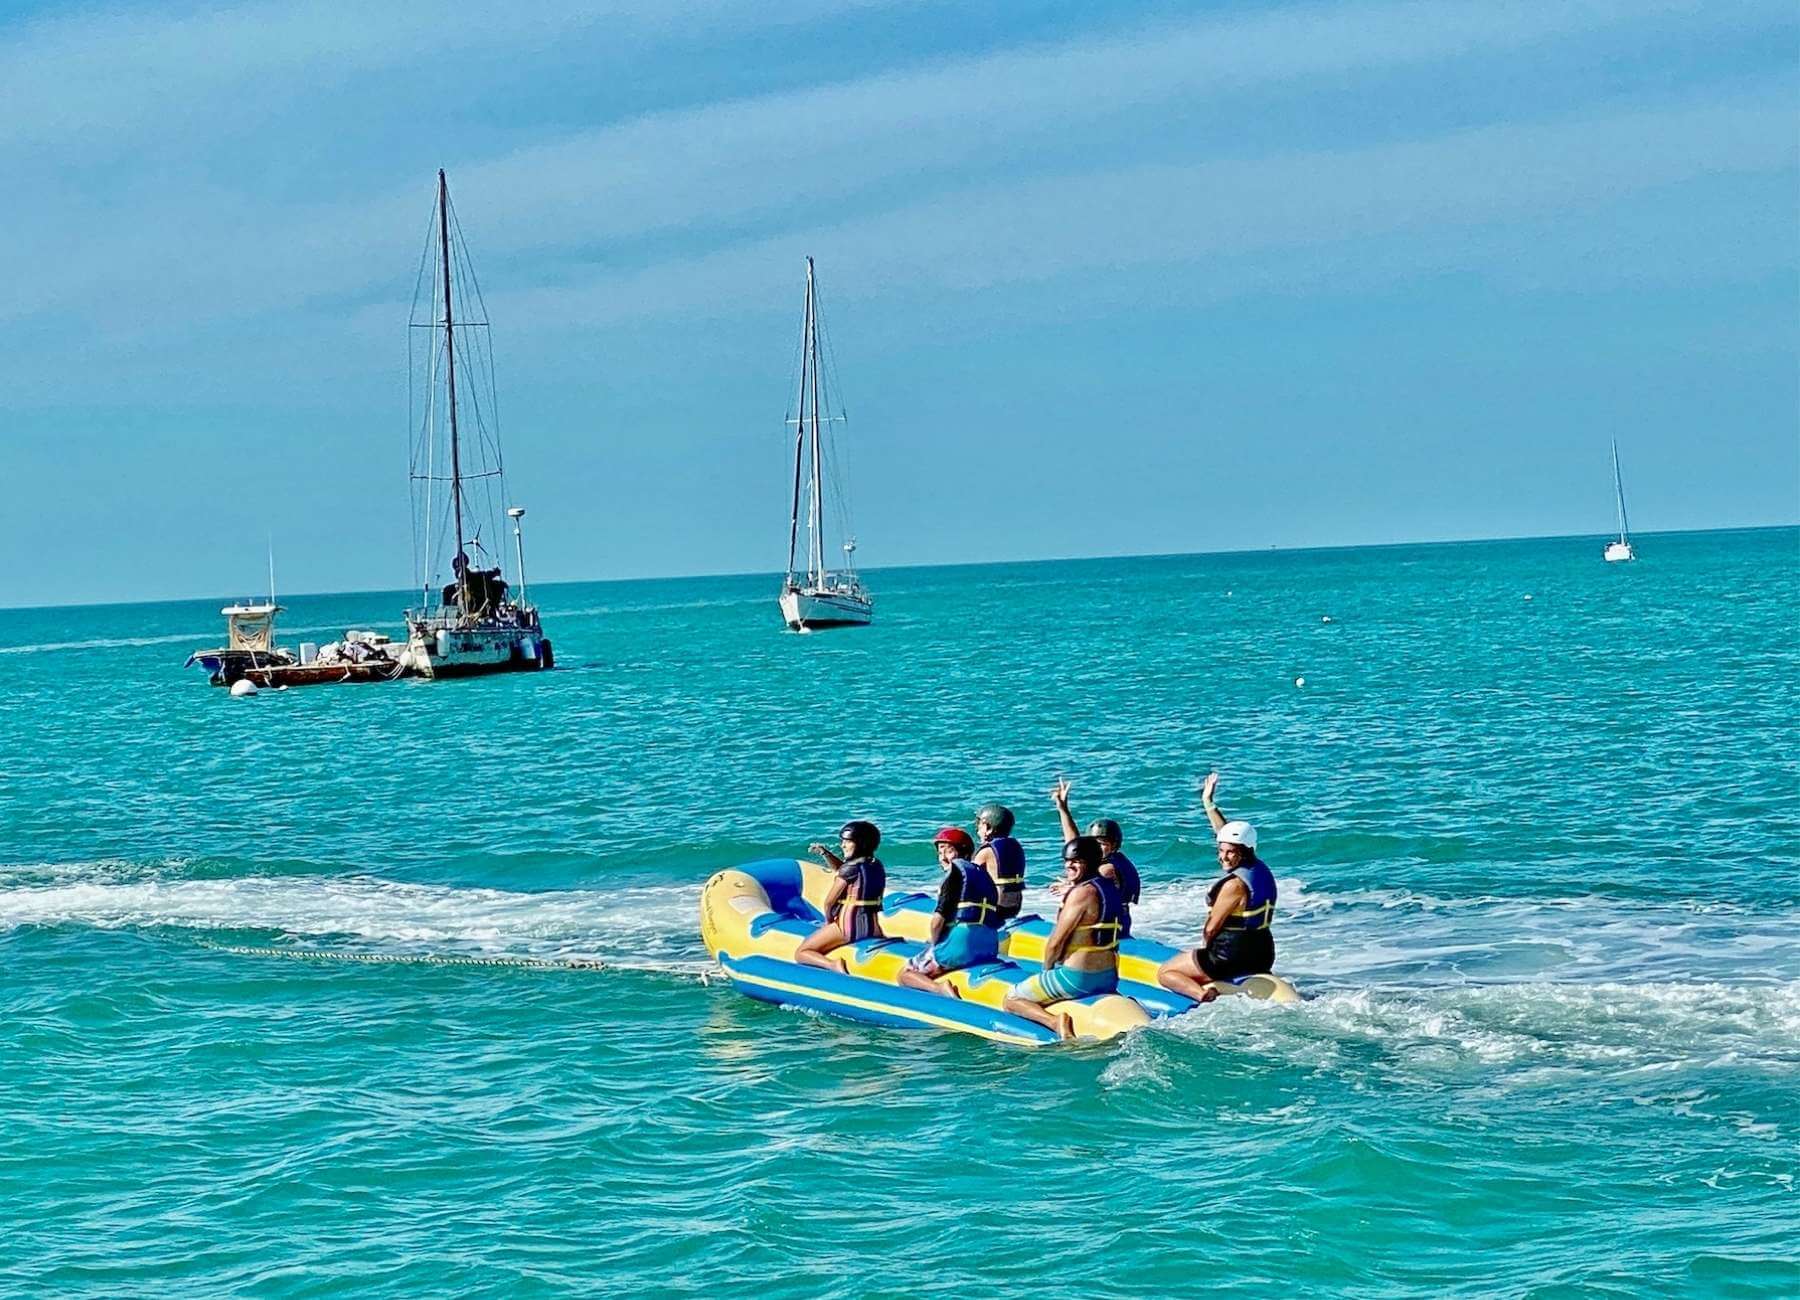 26 Epic Things To Do In Key West [Including Where To Stay]